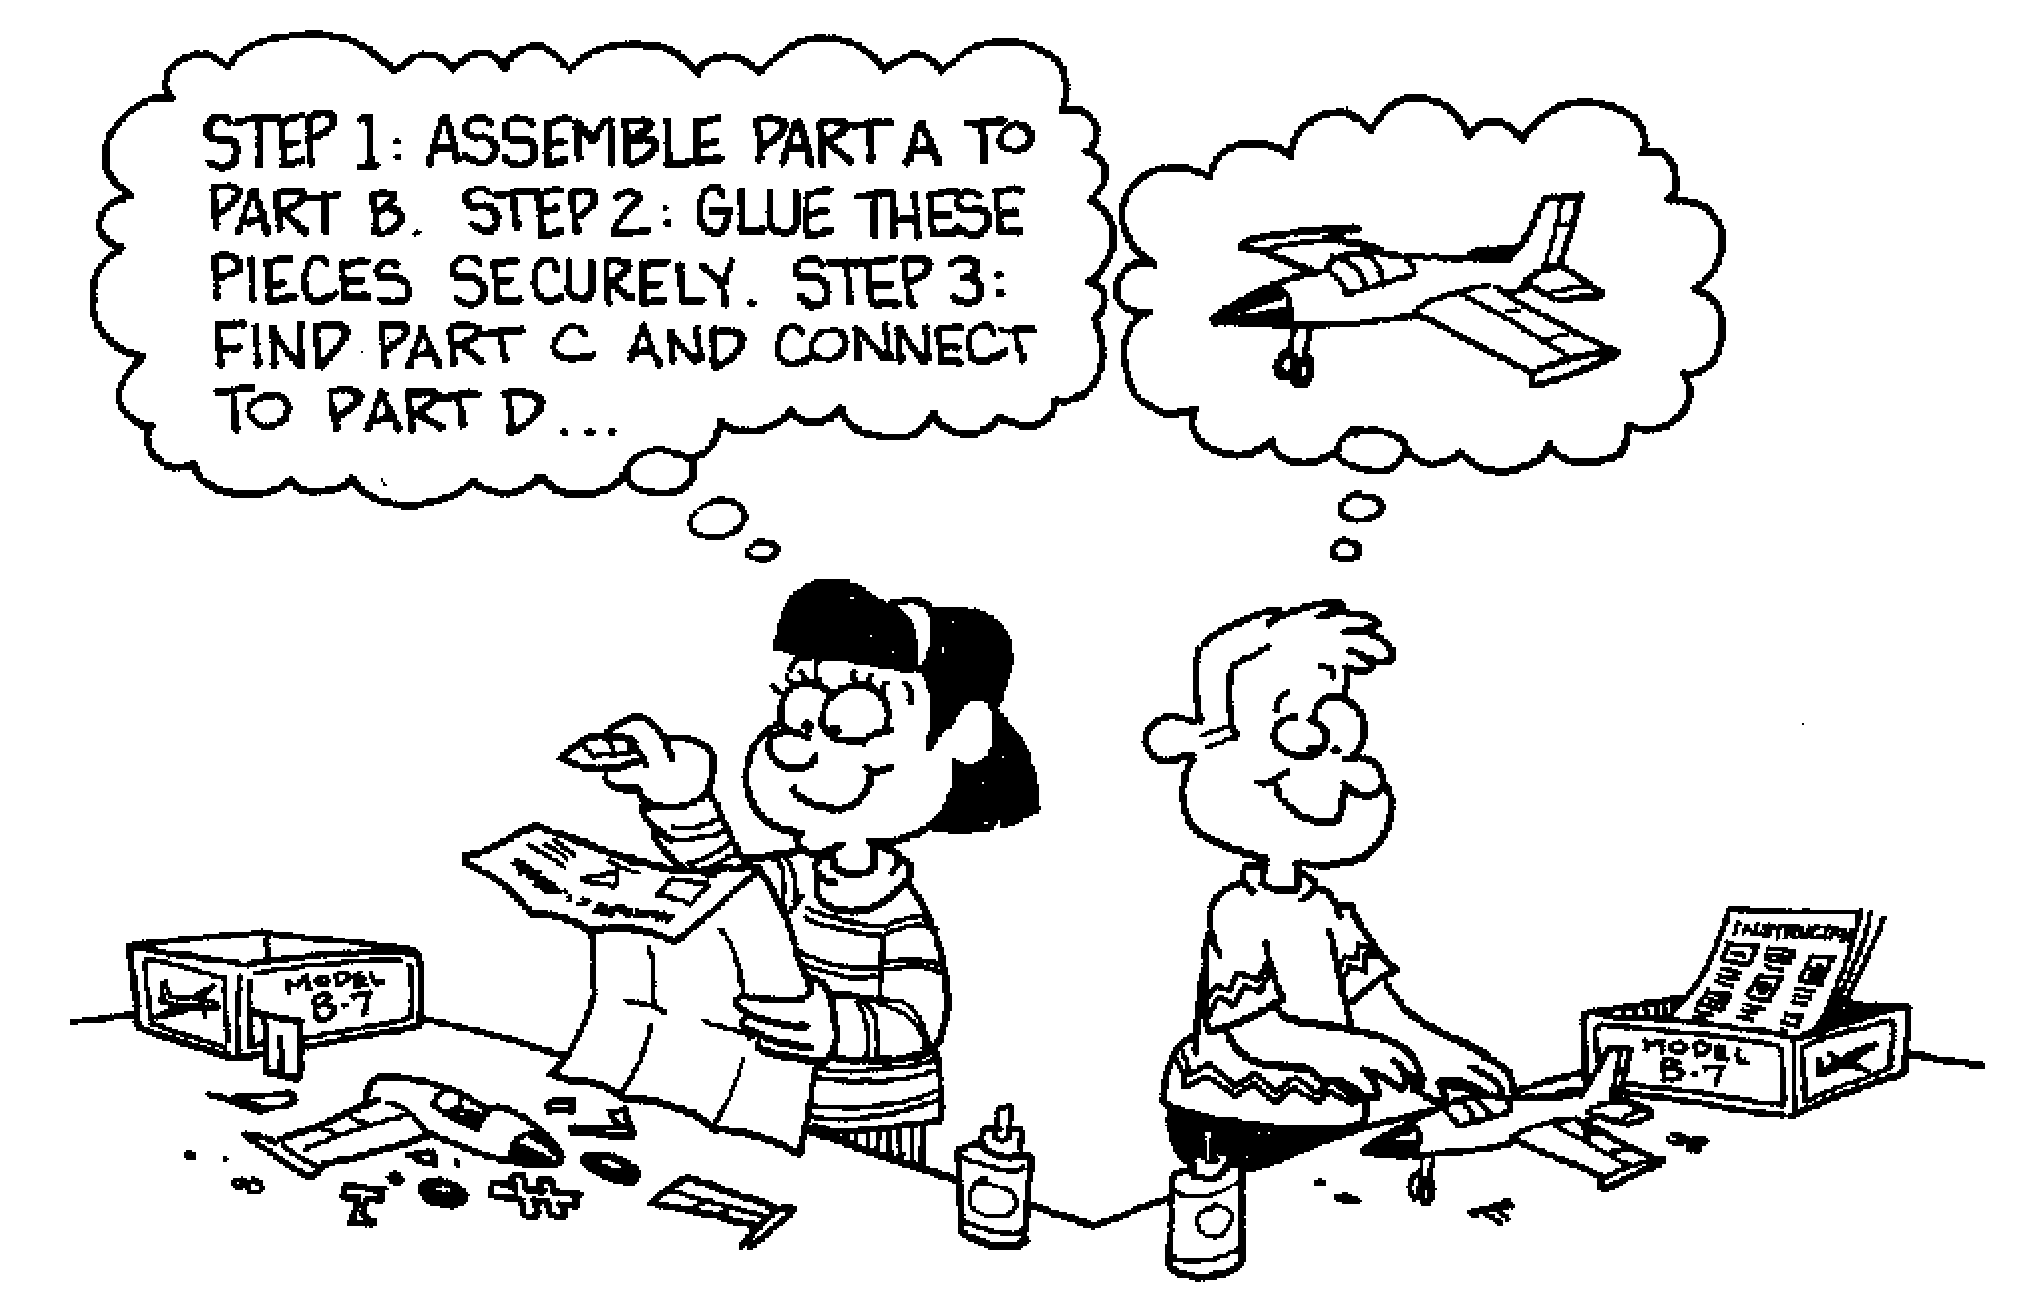 Cartoon showing a young girl reading step-by-step instructions in order to build a rocket, and then in contrast, a young boy imagining the finished plane in order to build his